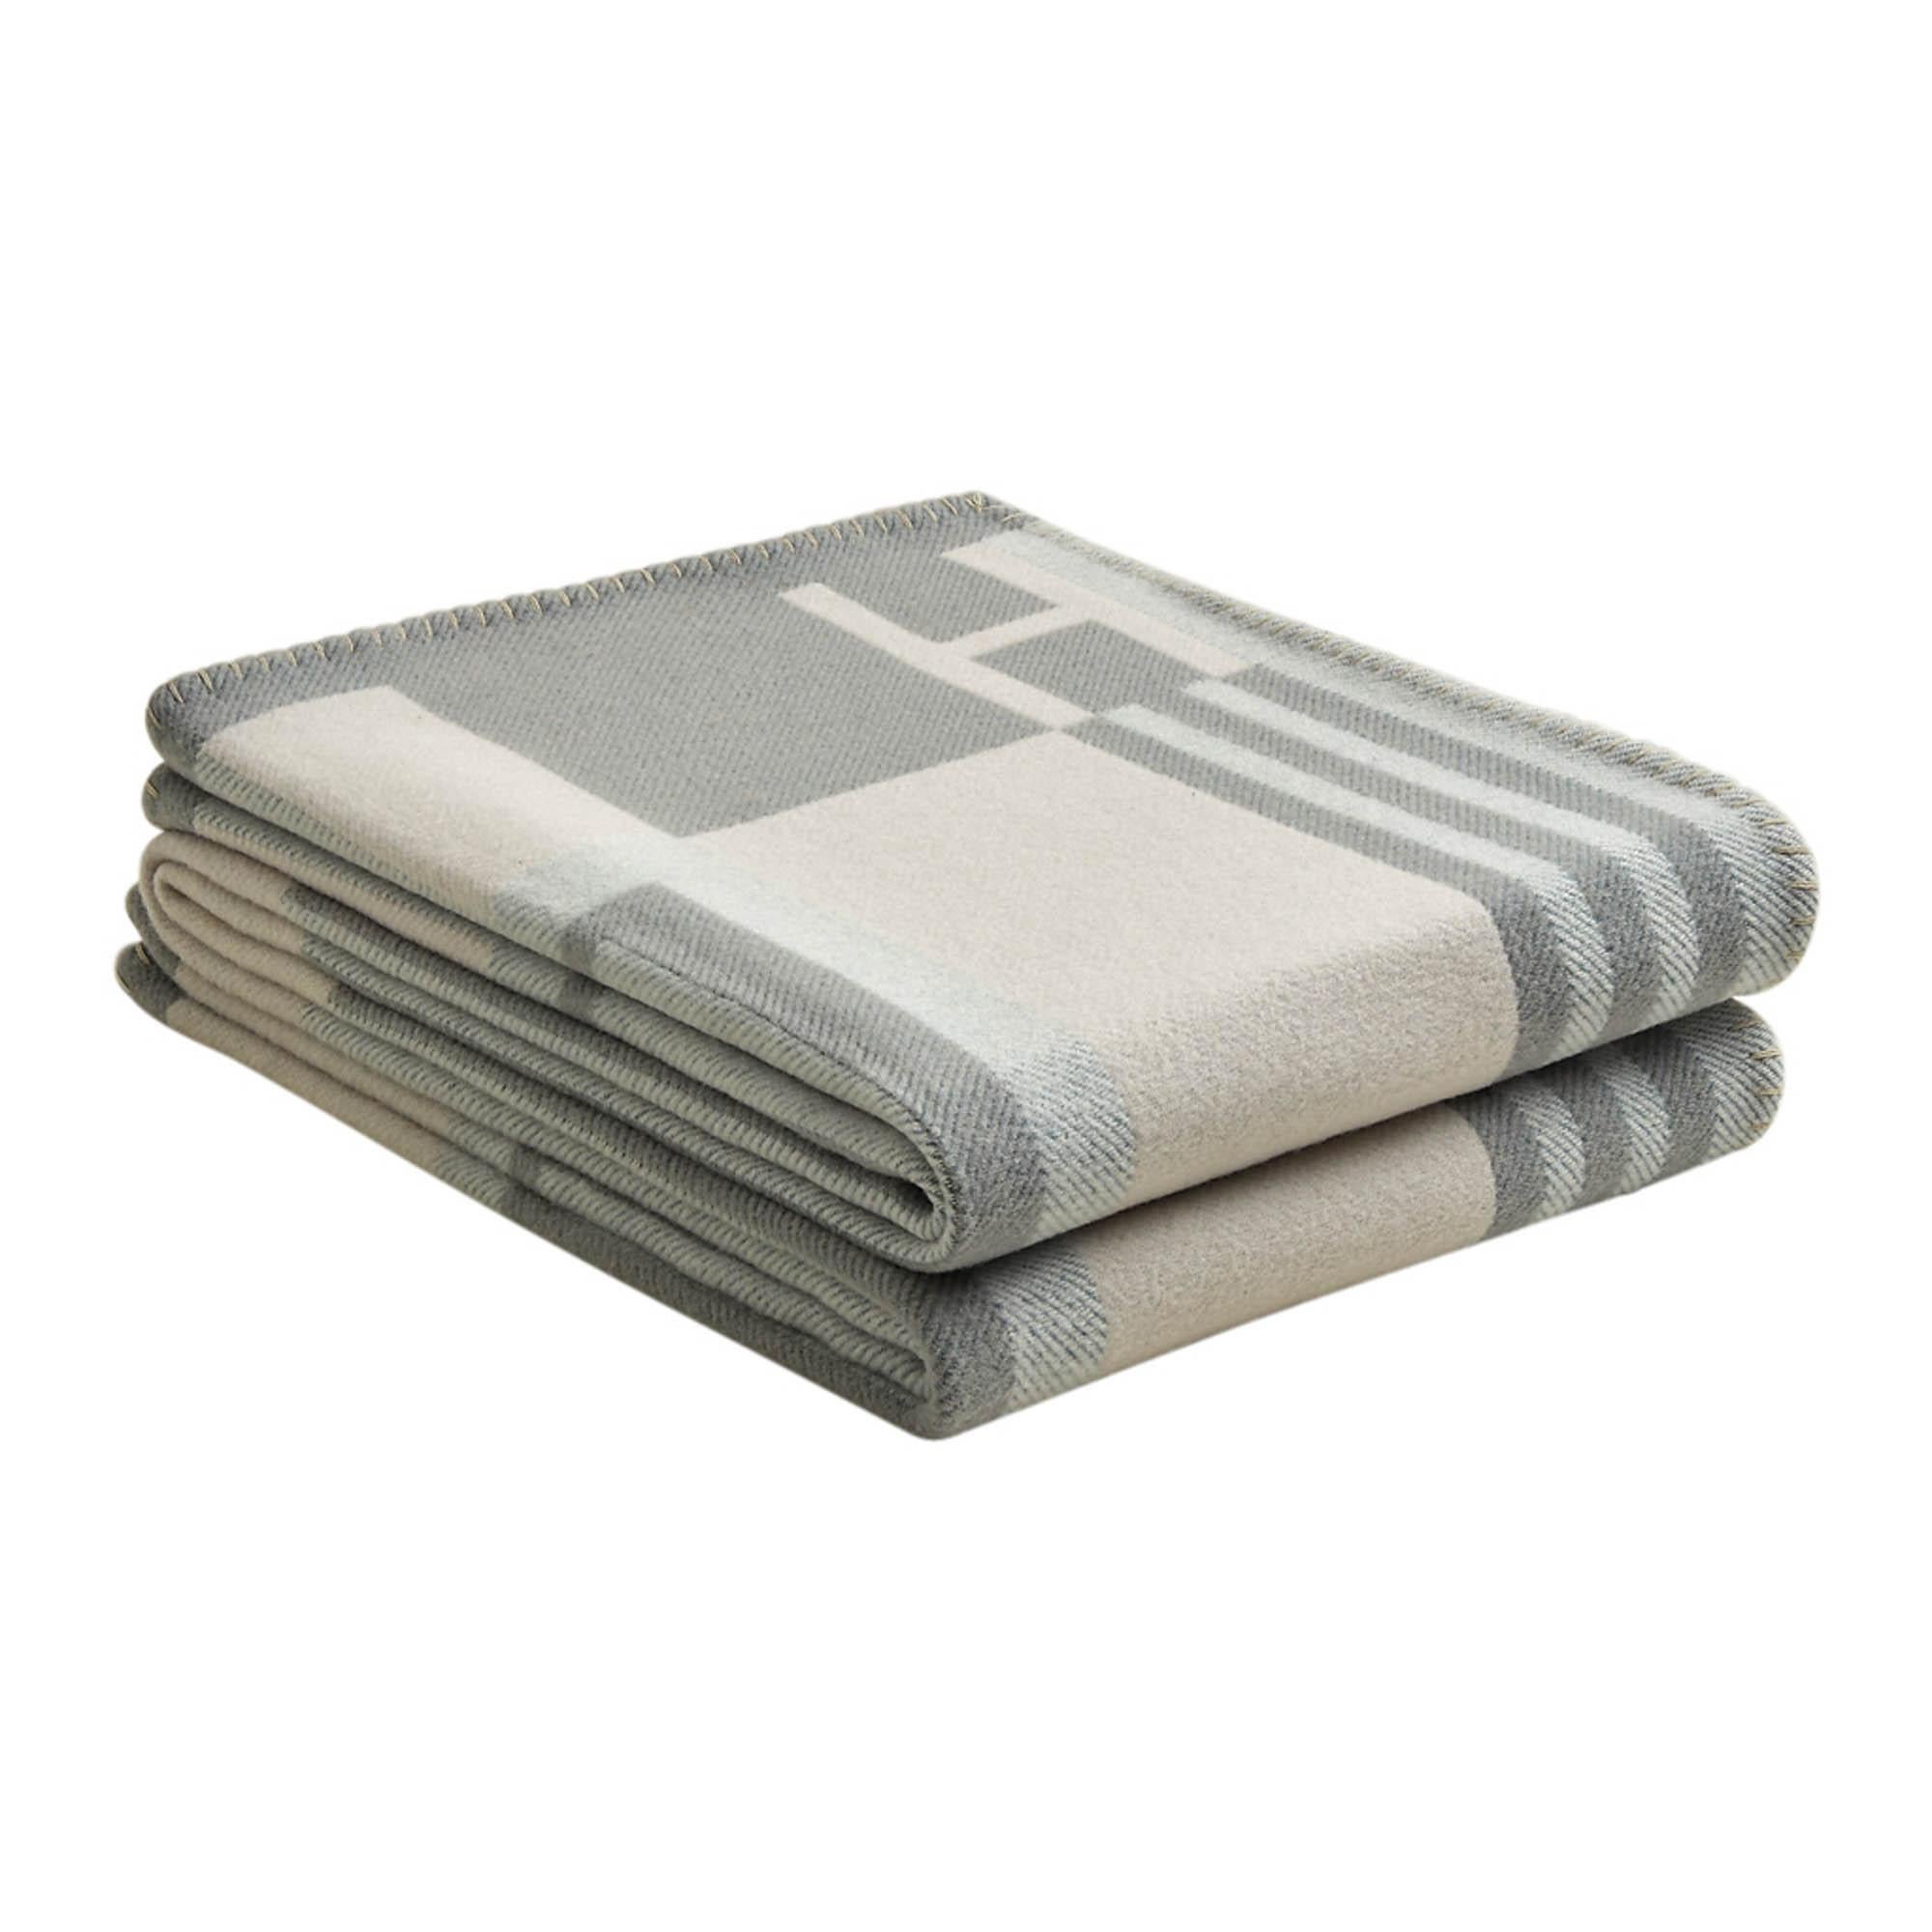 Hermes Ithaque Blanket Gris Perle Wool and Cashmere In New Condition For Sale In Miami, FL